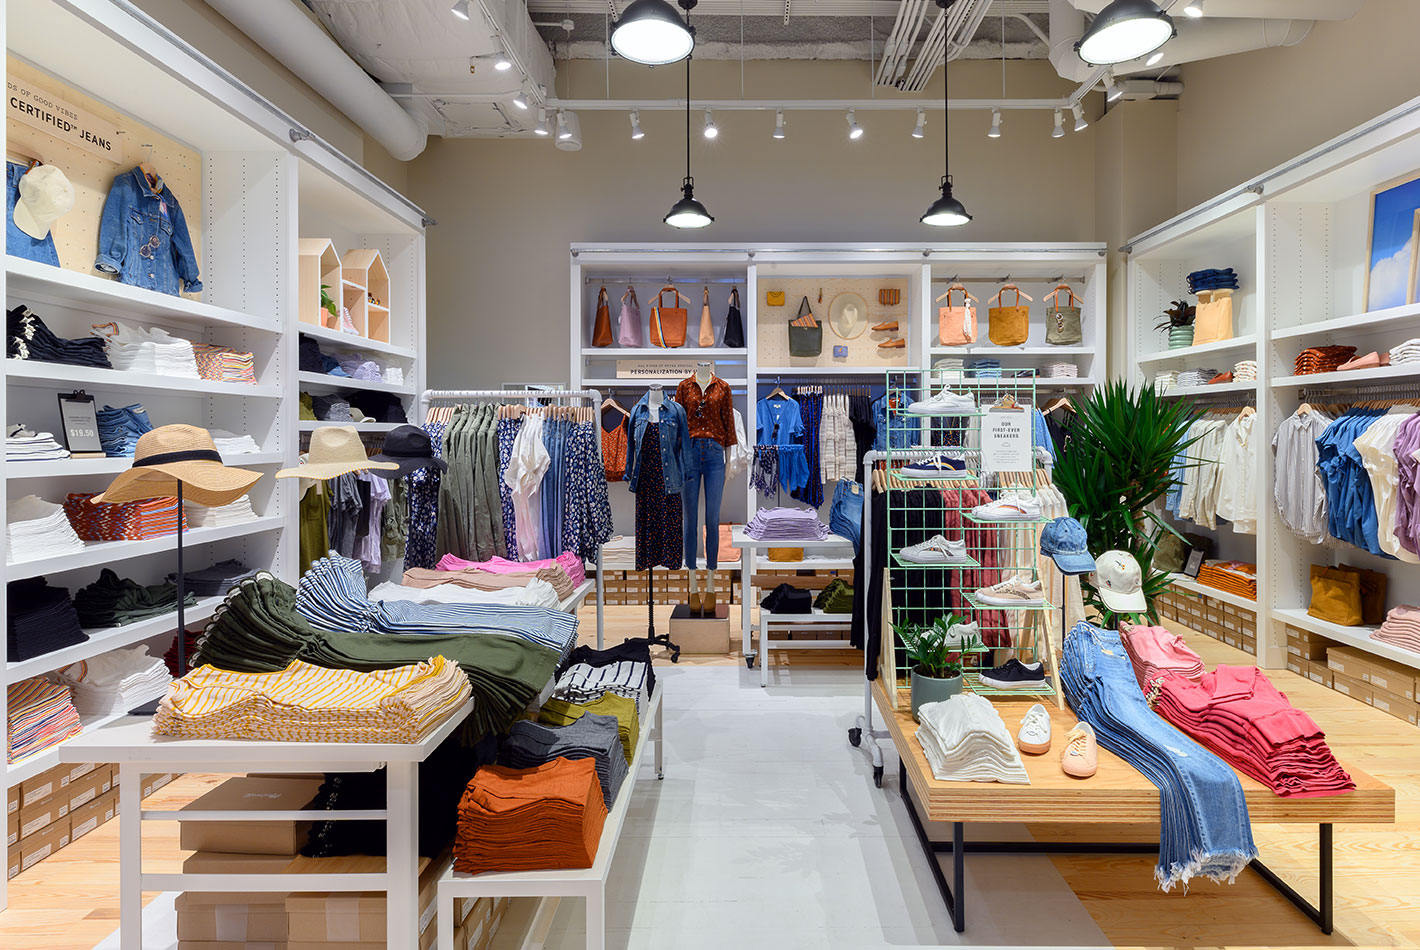 The women's department at Madewell features a collection of indigo-hued clothing and accessories. Dressing rooms nearby are covered in canvas panels.